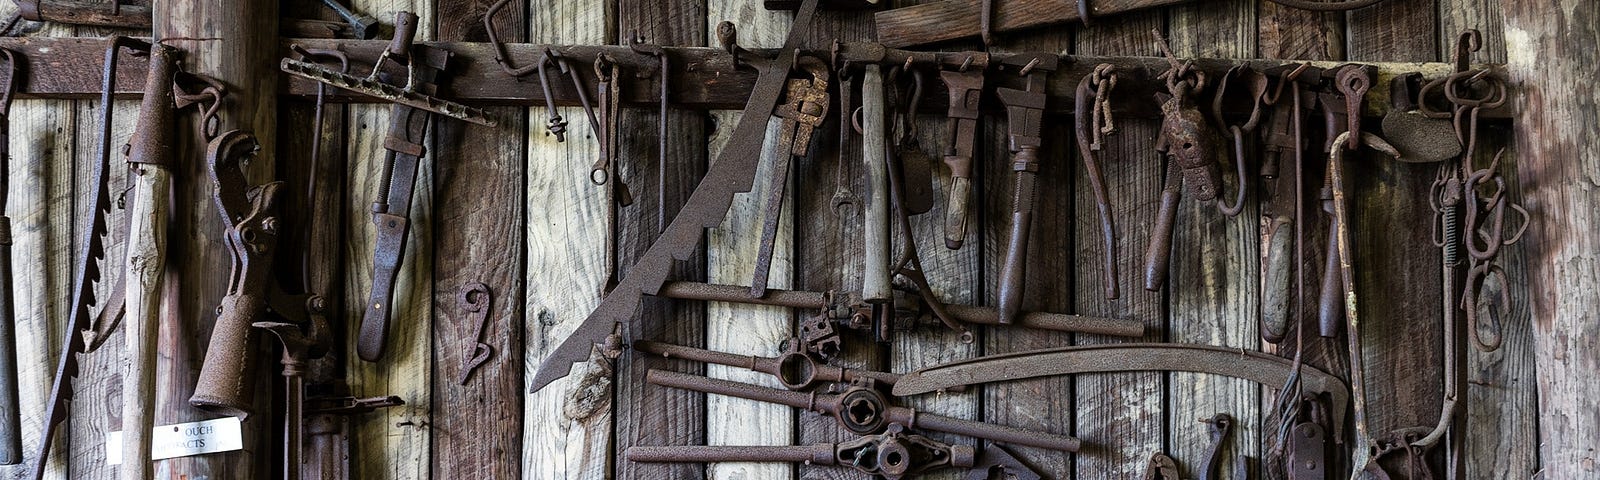 An image of rustic tools organised on a wall with a work bench underneath